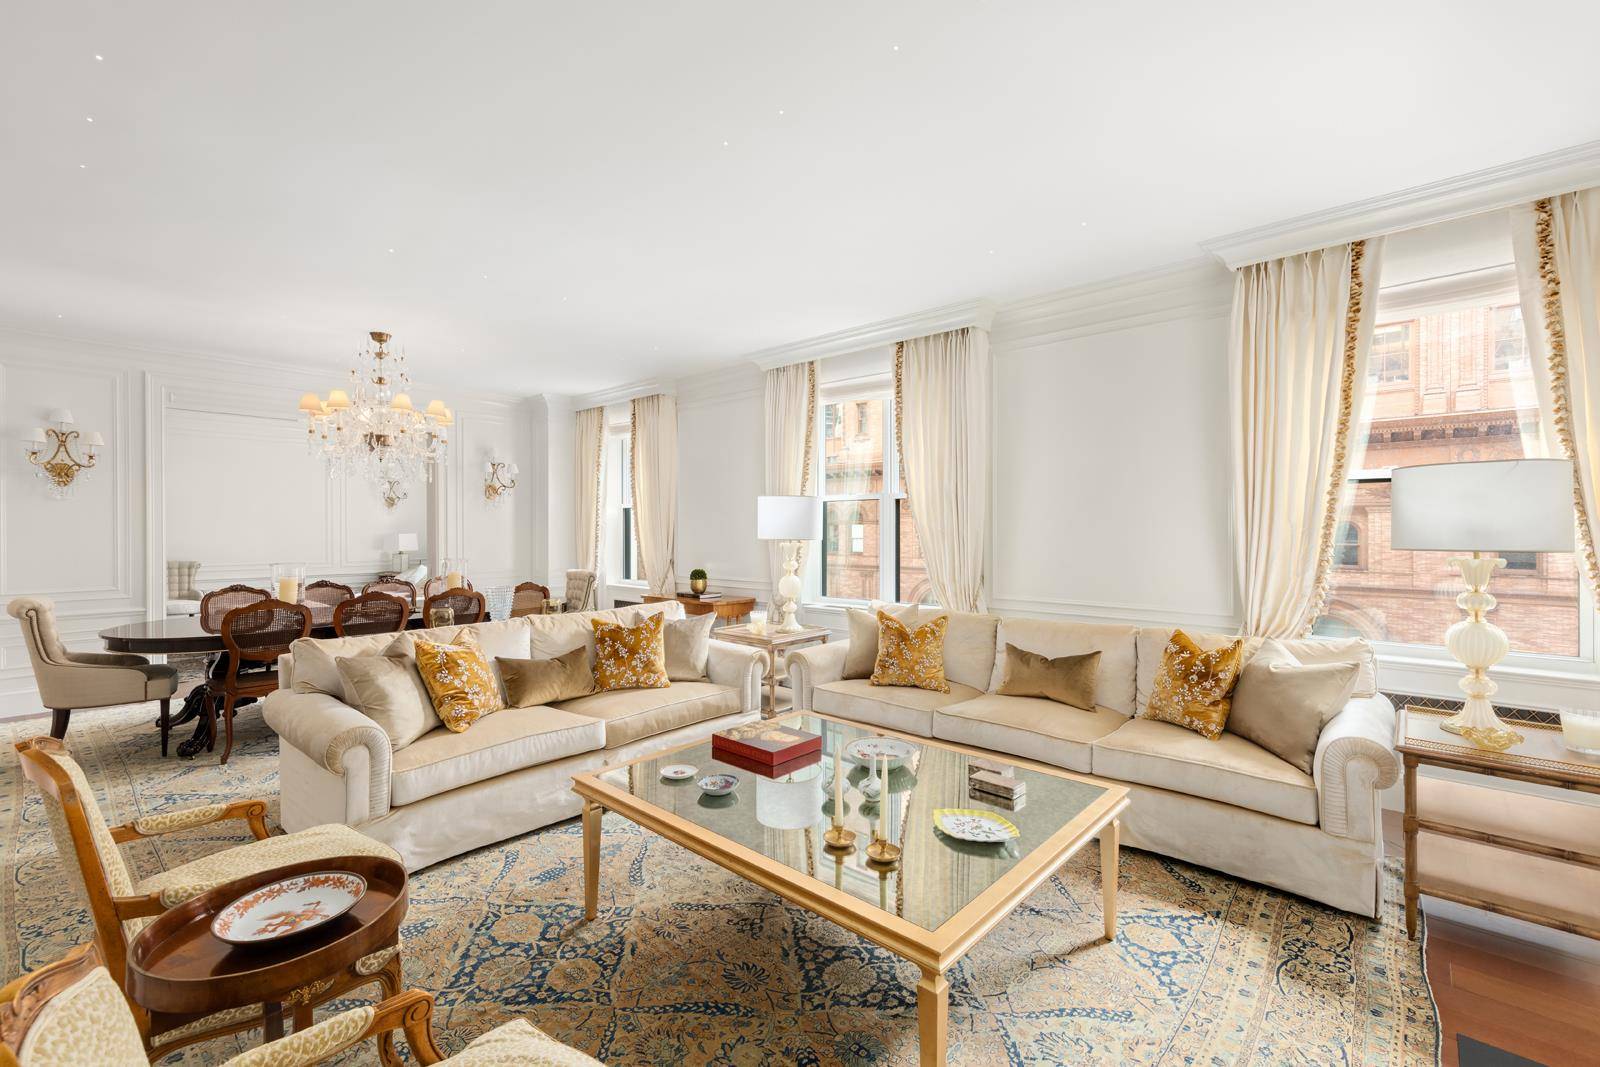 Welcome to residence 7B at The Briarcliff, a pre war white glove full service condominium located in the heart of Billionaire's Row, on 57th Street only 2 blocks from Central ...